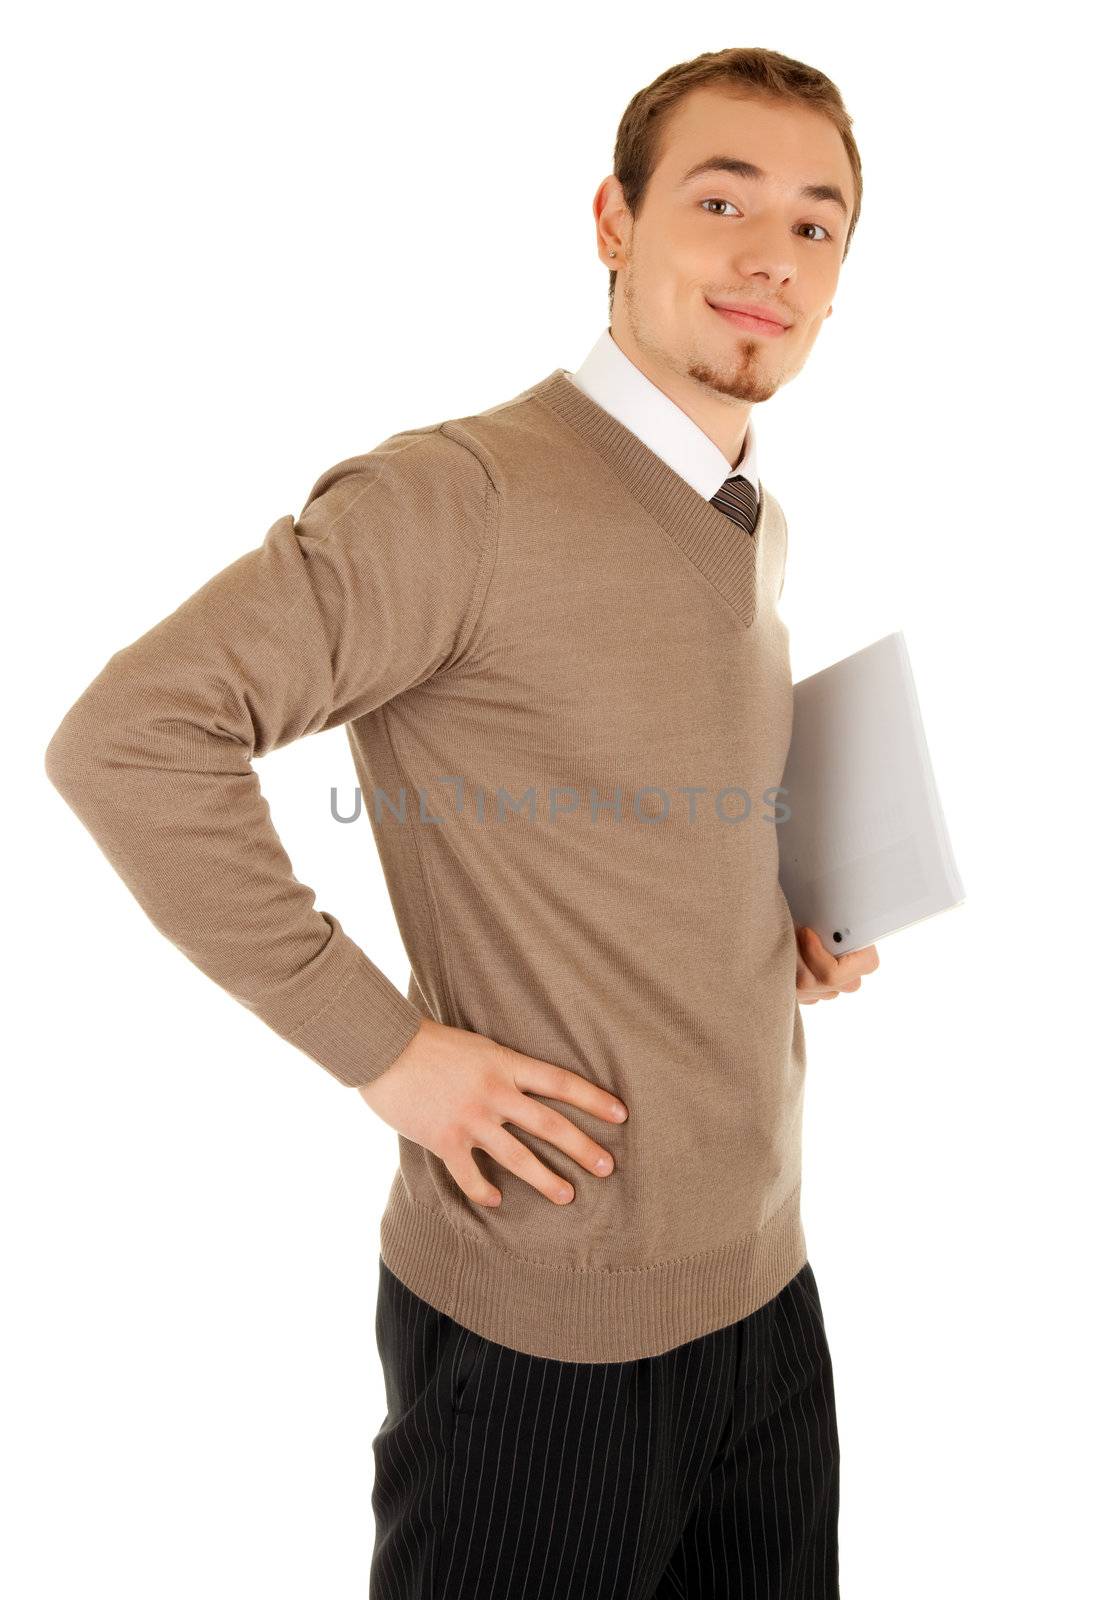 Smiling business man with documentation isolated on white.